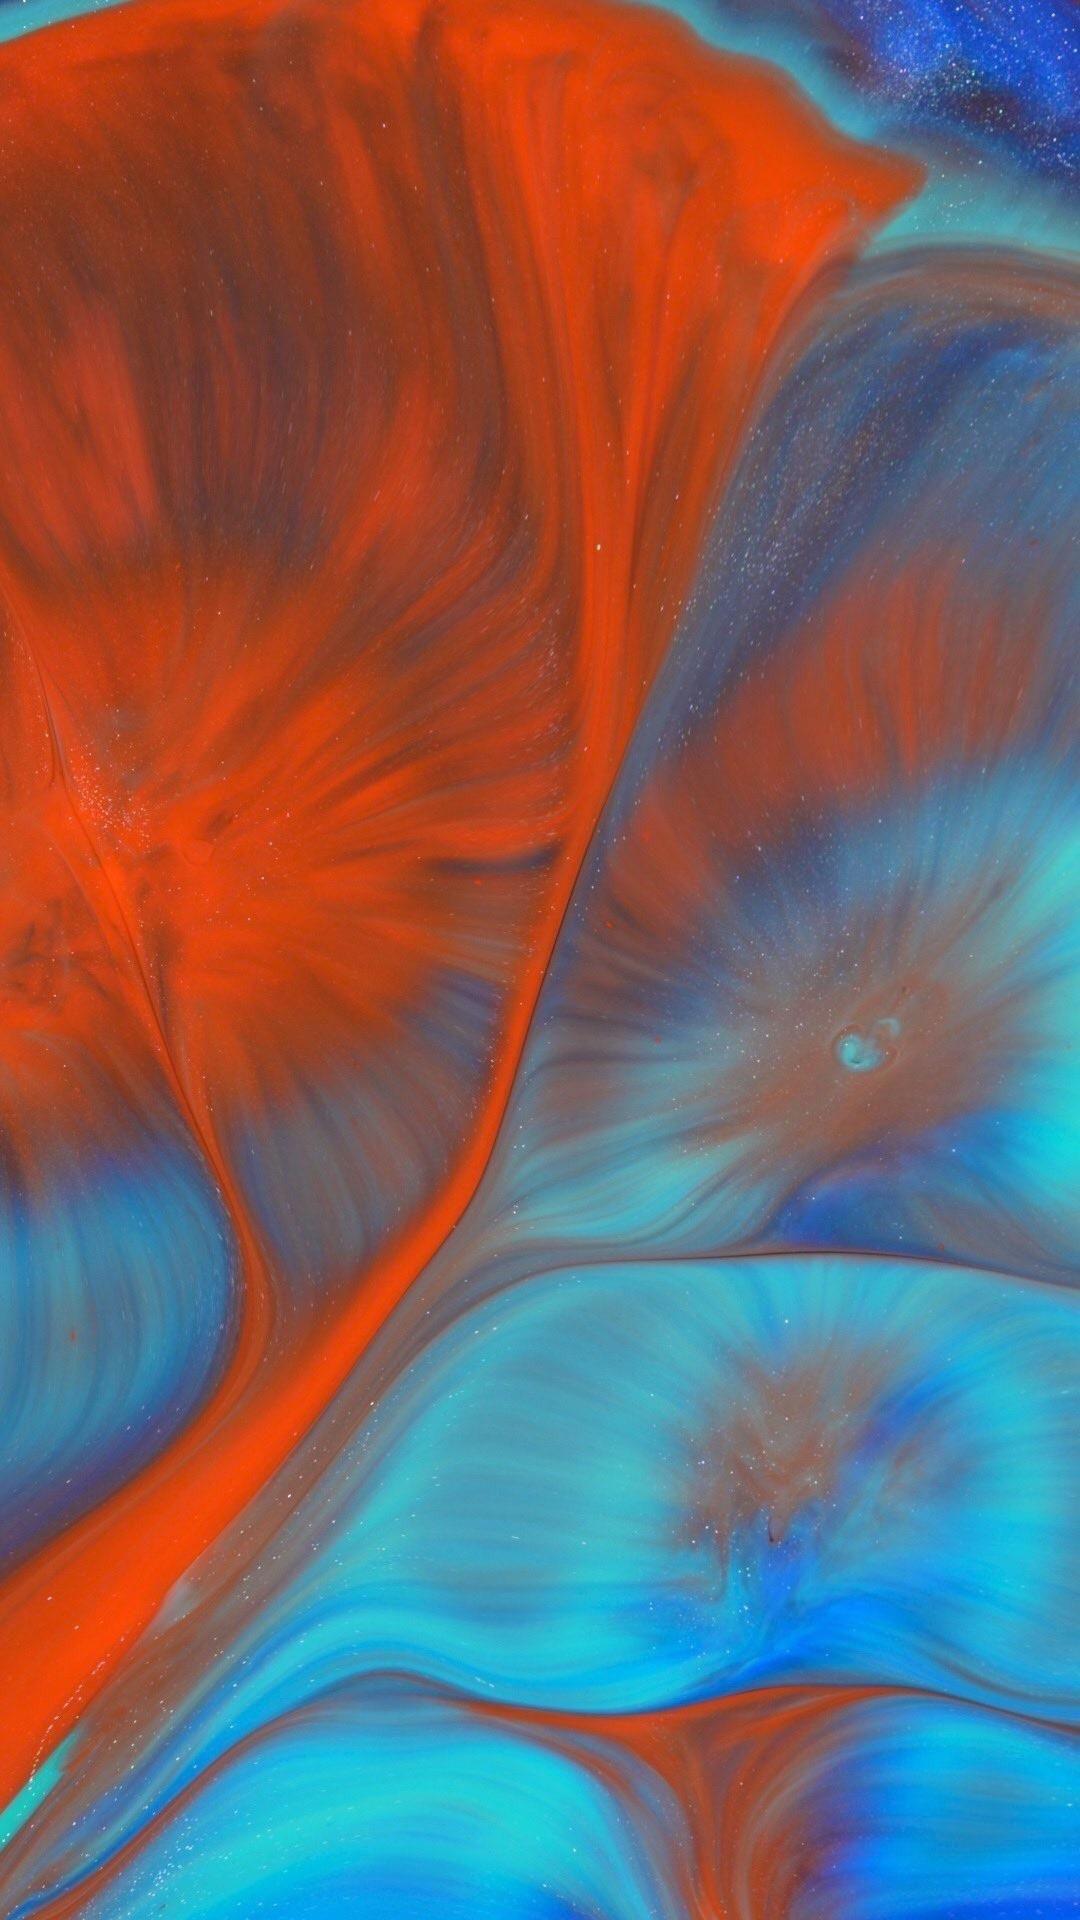 Liquid Wallpaper. Abstract, Abstract image, Colorful